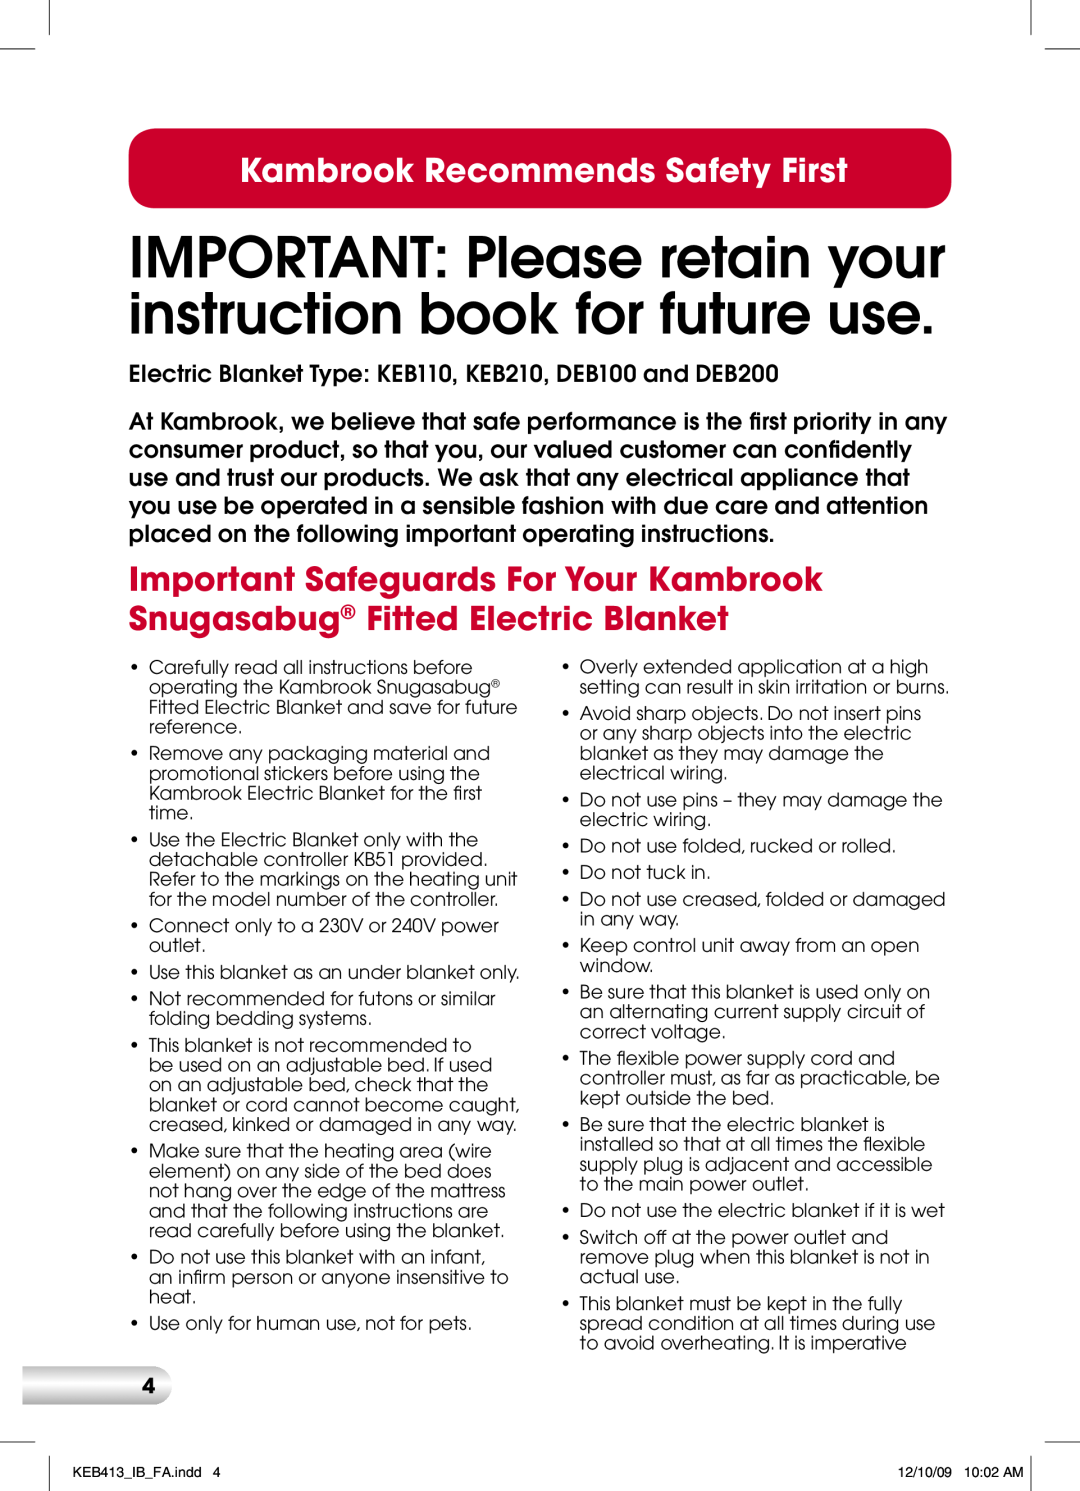 Kambrook KEB533, KEB413 IMPORTANT Please retain your instruction book for future use, Kambrook Recommends Safety First 